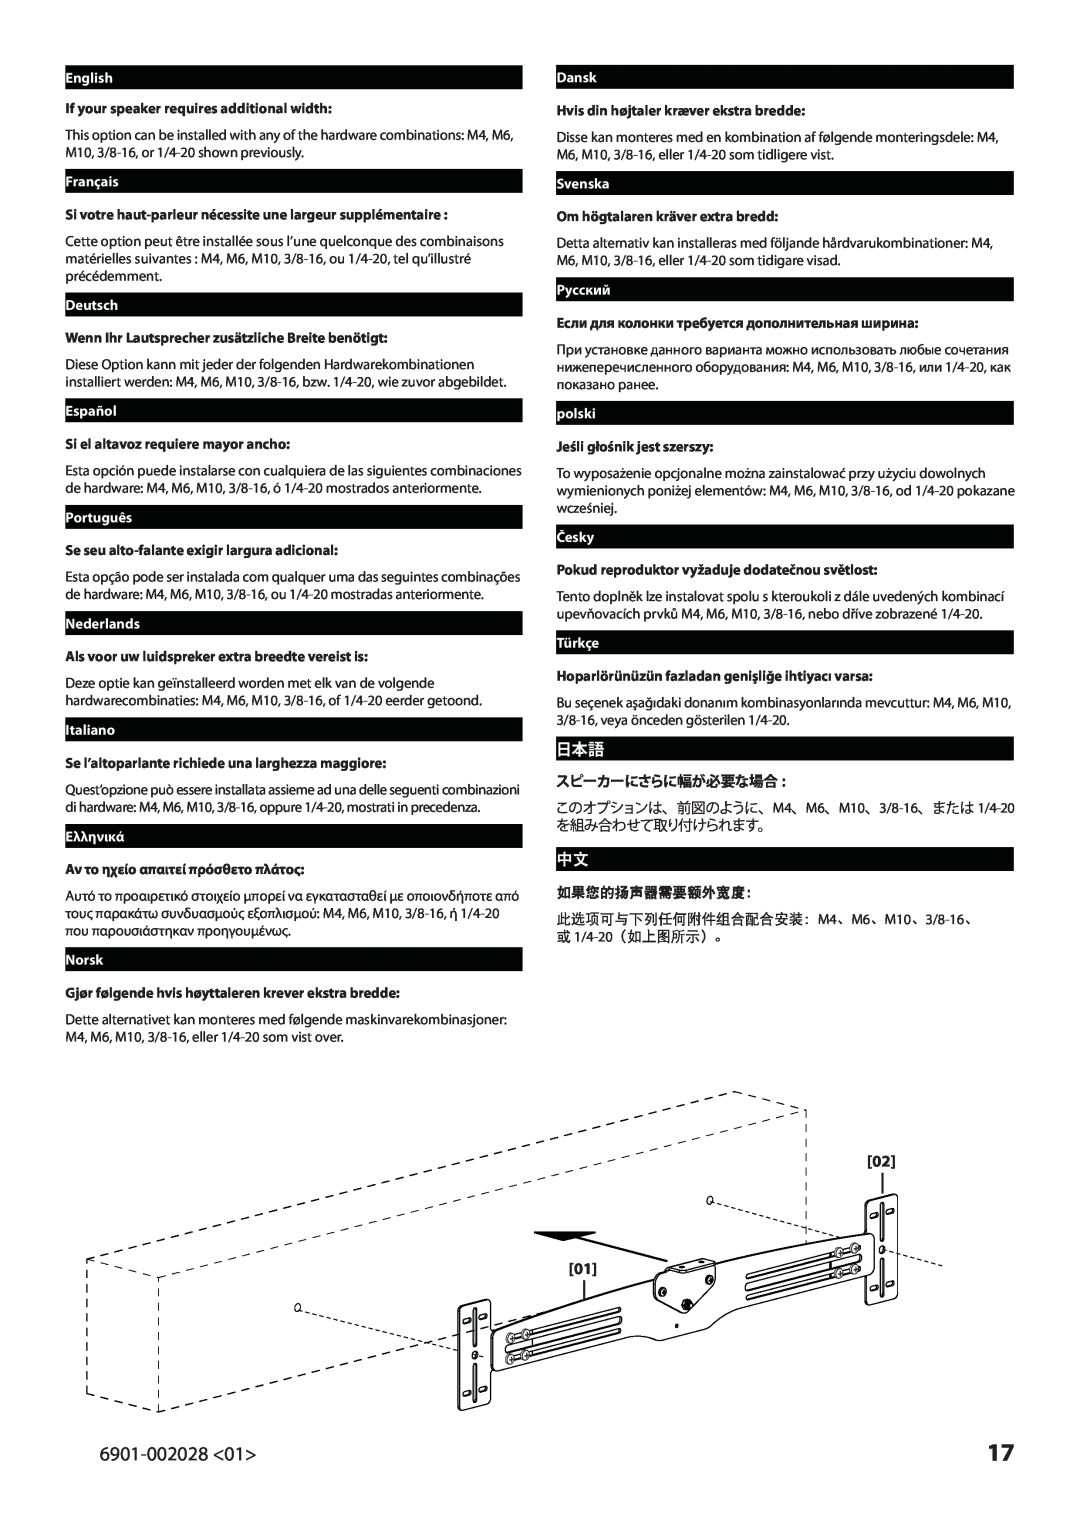 Sanus Systems VMA202 manual 6901-002028<01>, If your speaker requires additional width, スピーカーにさらに幅が必要な場合, 如果您的扬声器需要额外宽度： 